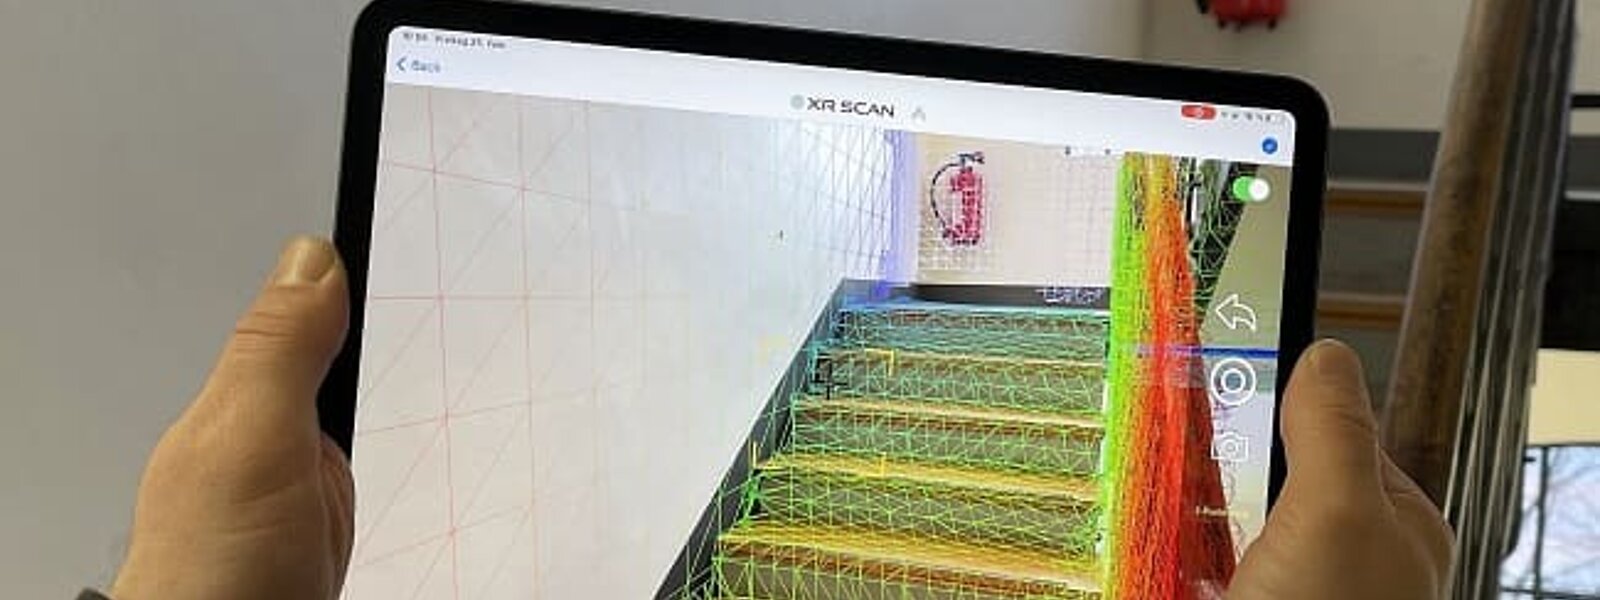 Digital measurement of a staircase with XR Scan